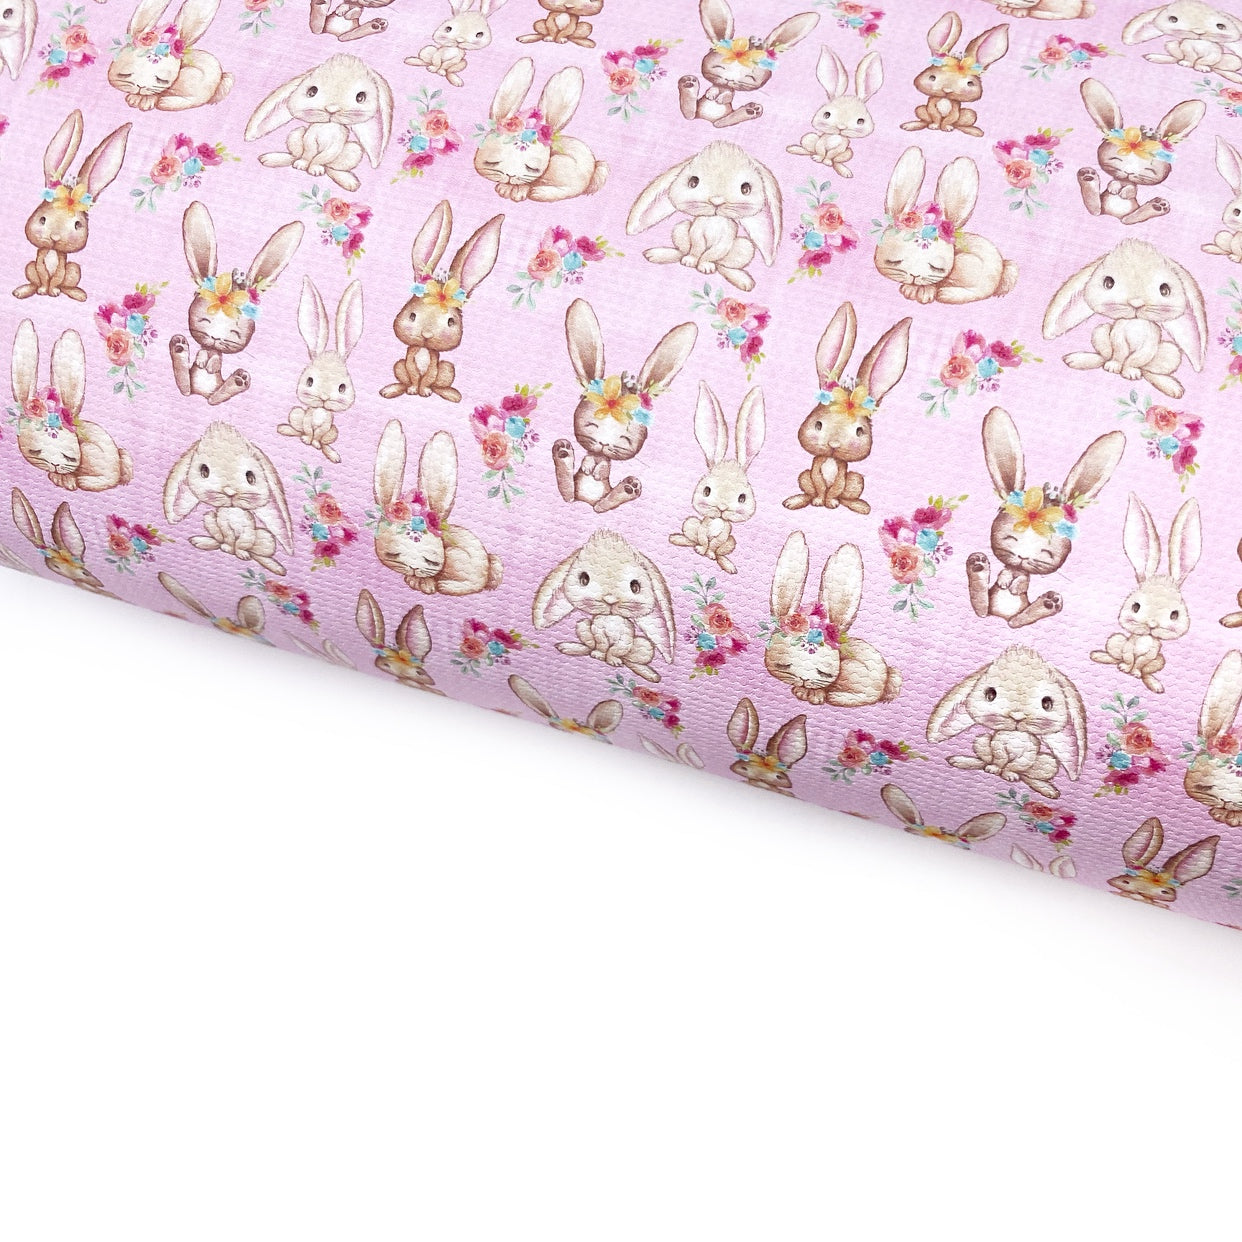 Hop, Hop Little Bunny Lux Premium Printed Bow Fabric